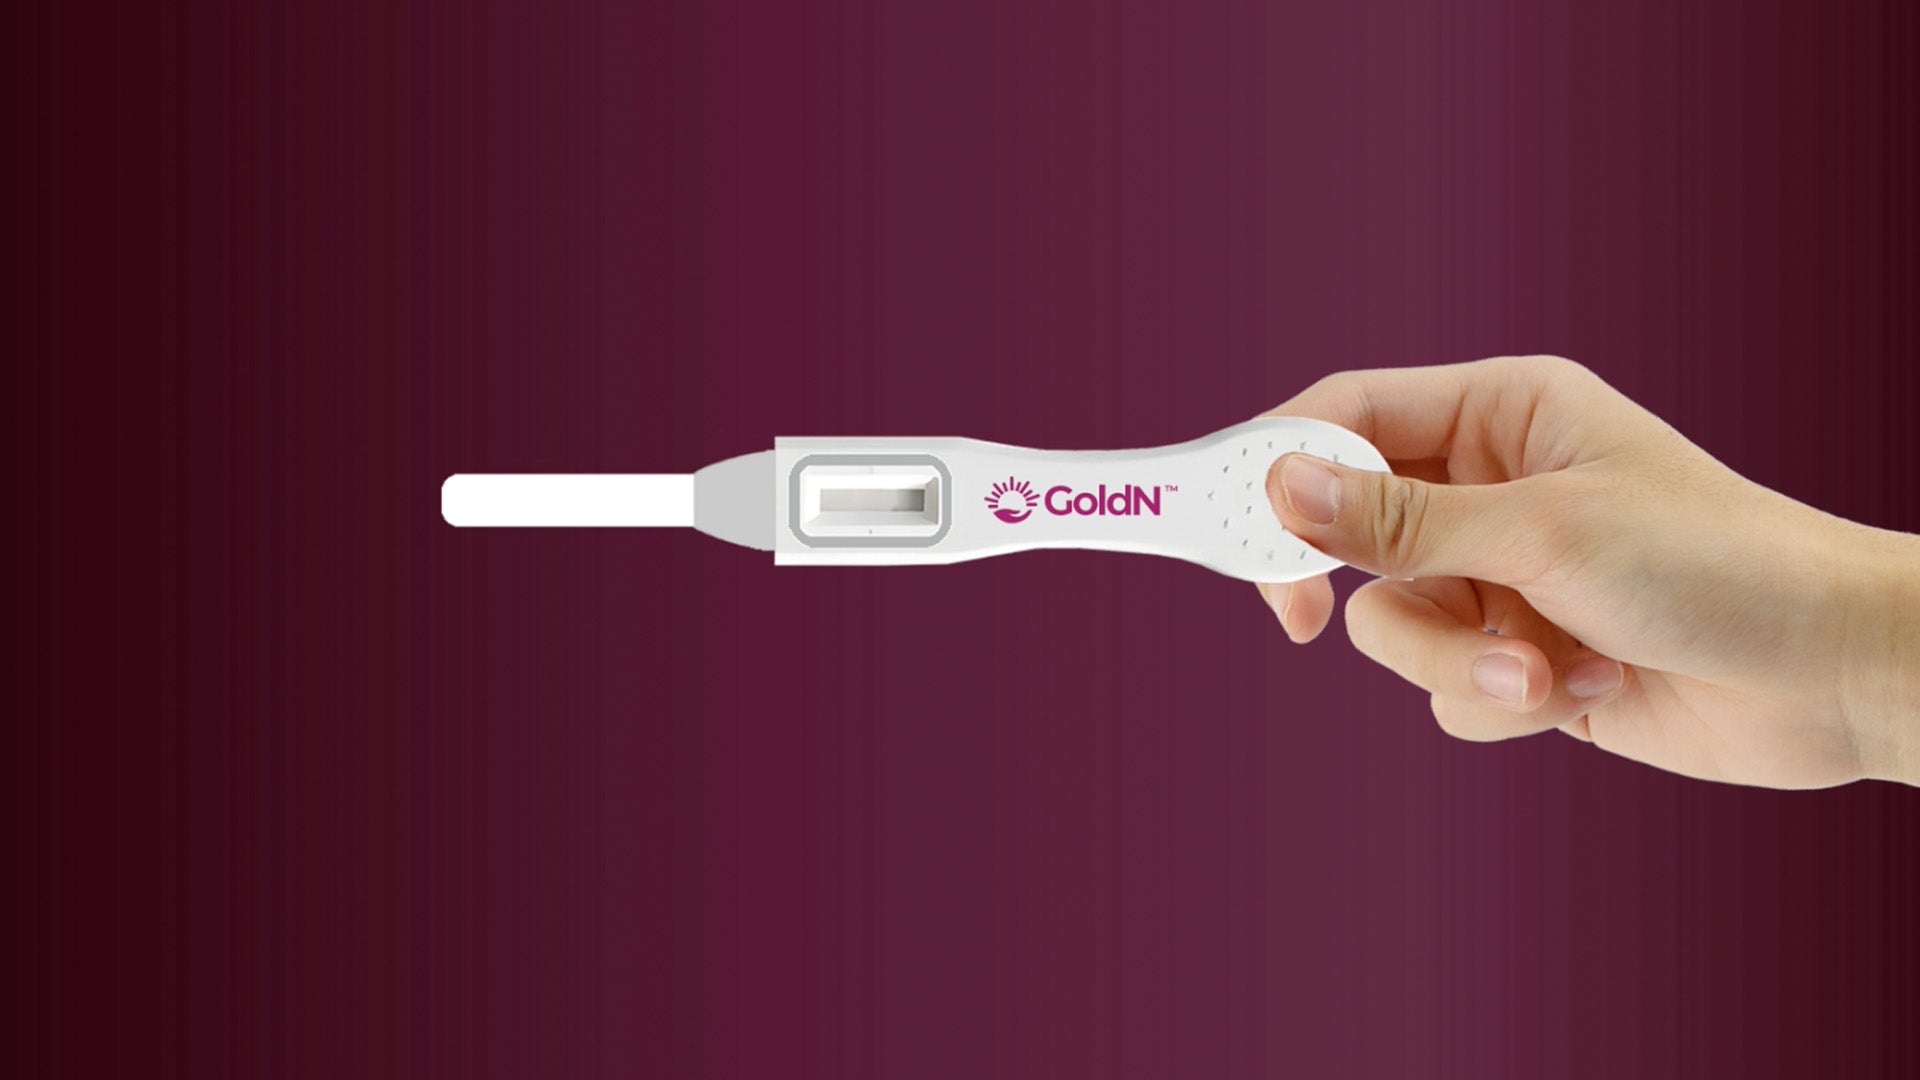 LH-Ovulation video with instructions for how to use GoldN's at-home test kit.